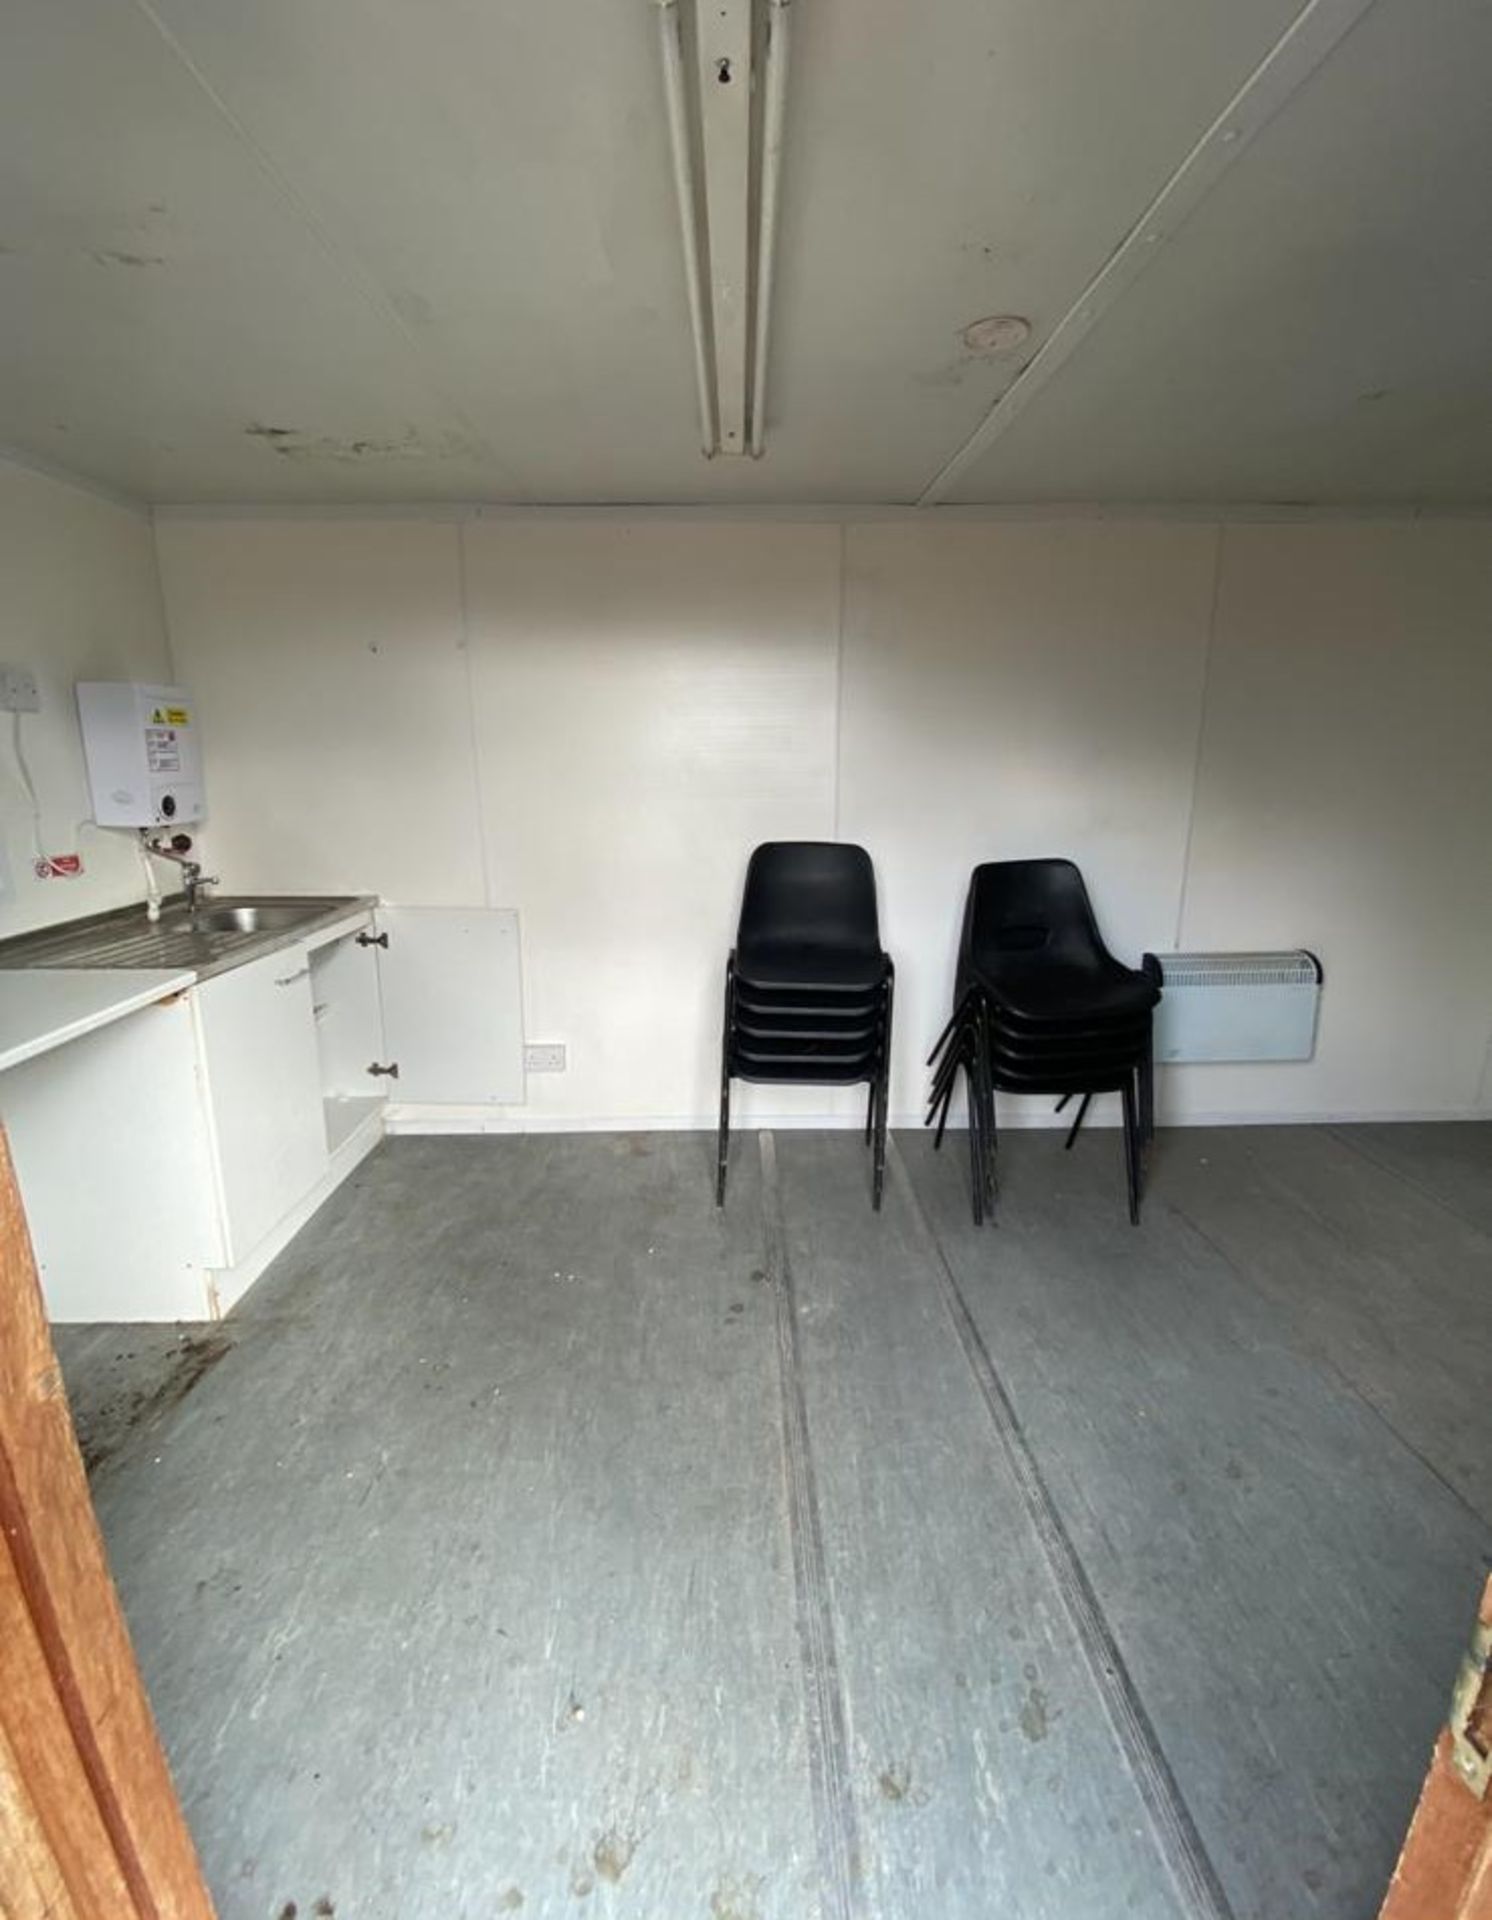 24ft site office canteen container cabin - Image 5 of 9